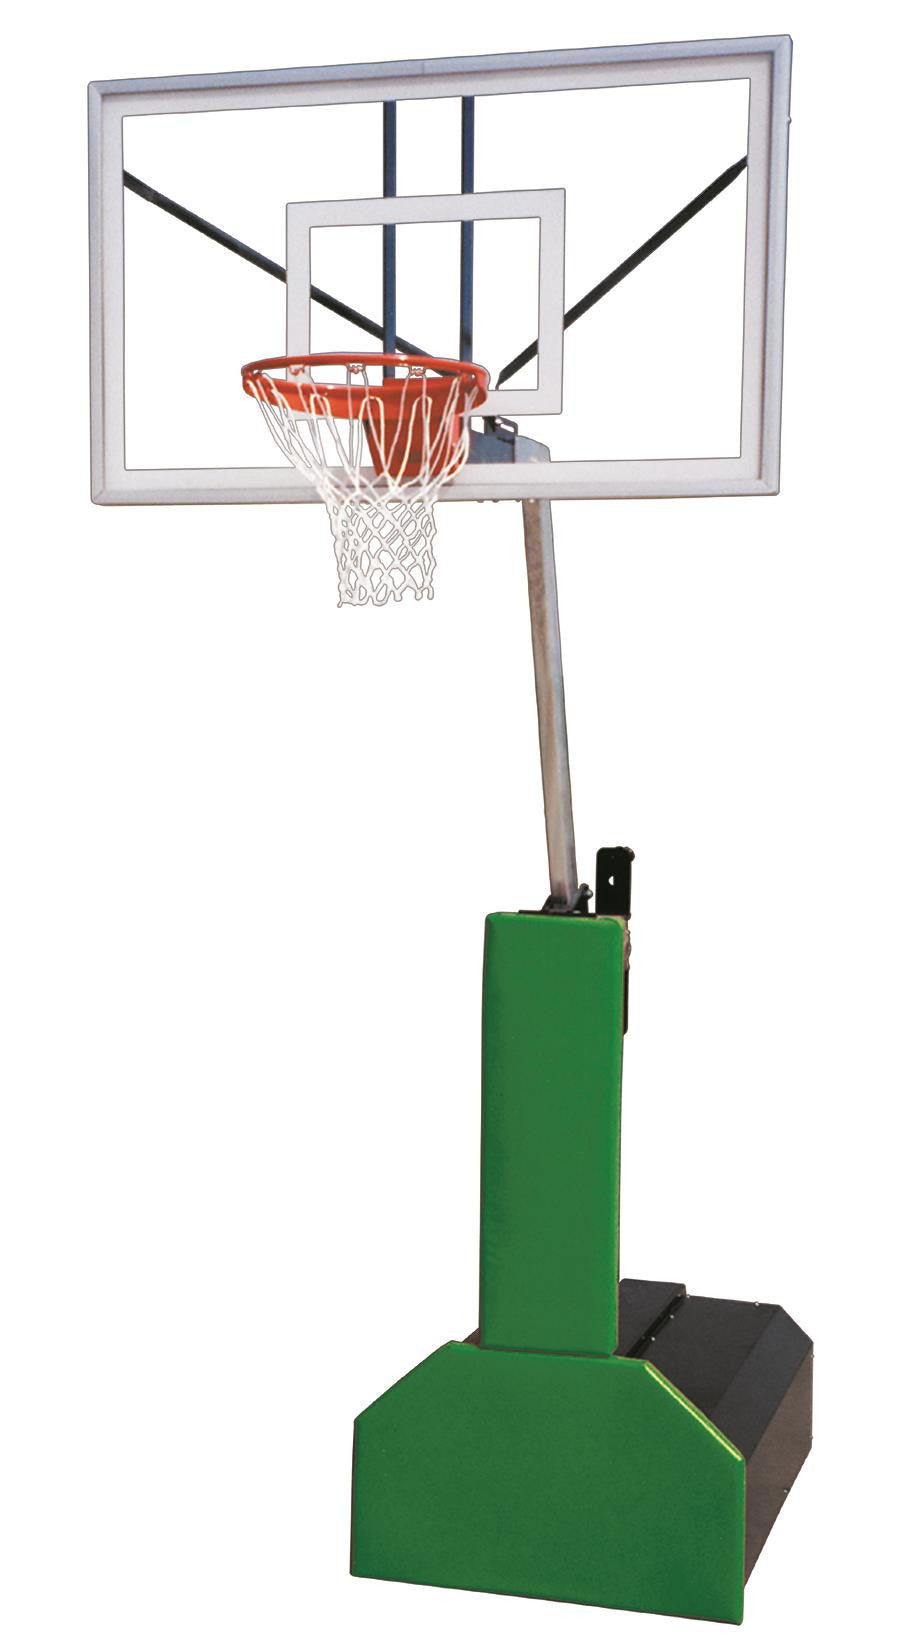 First Team Thunder Pro Portable Adjustable Basketball Hoop 60 inch Tempered Glass